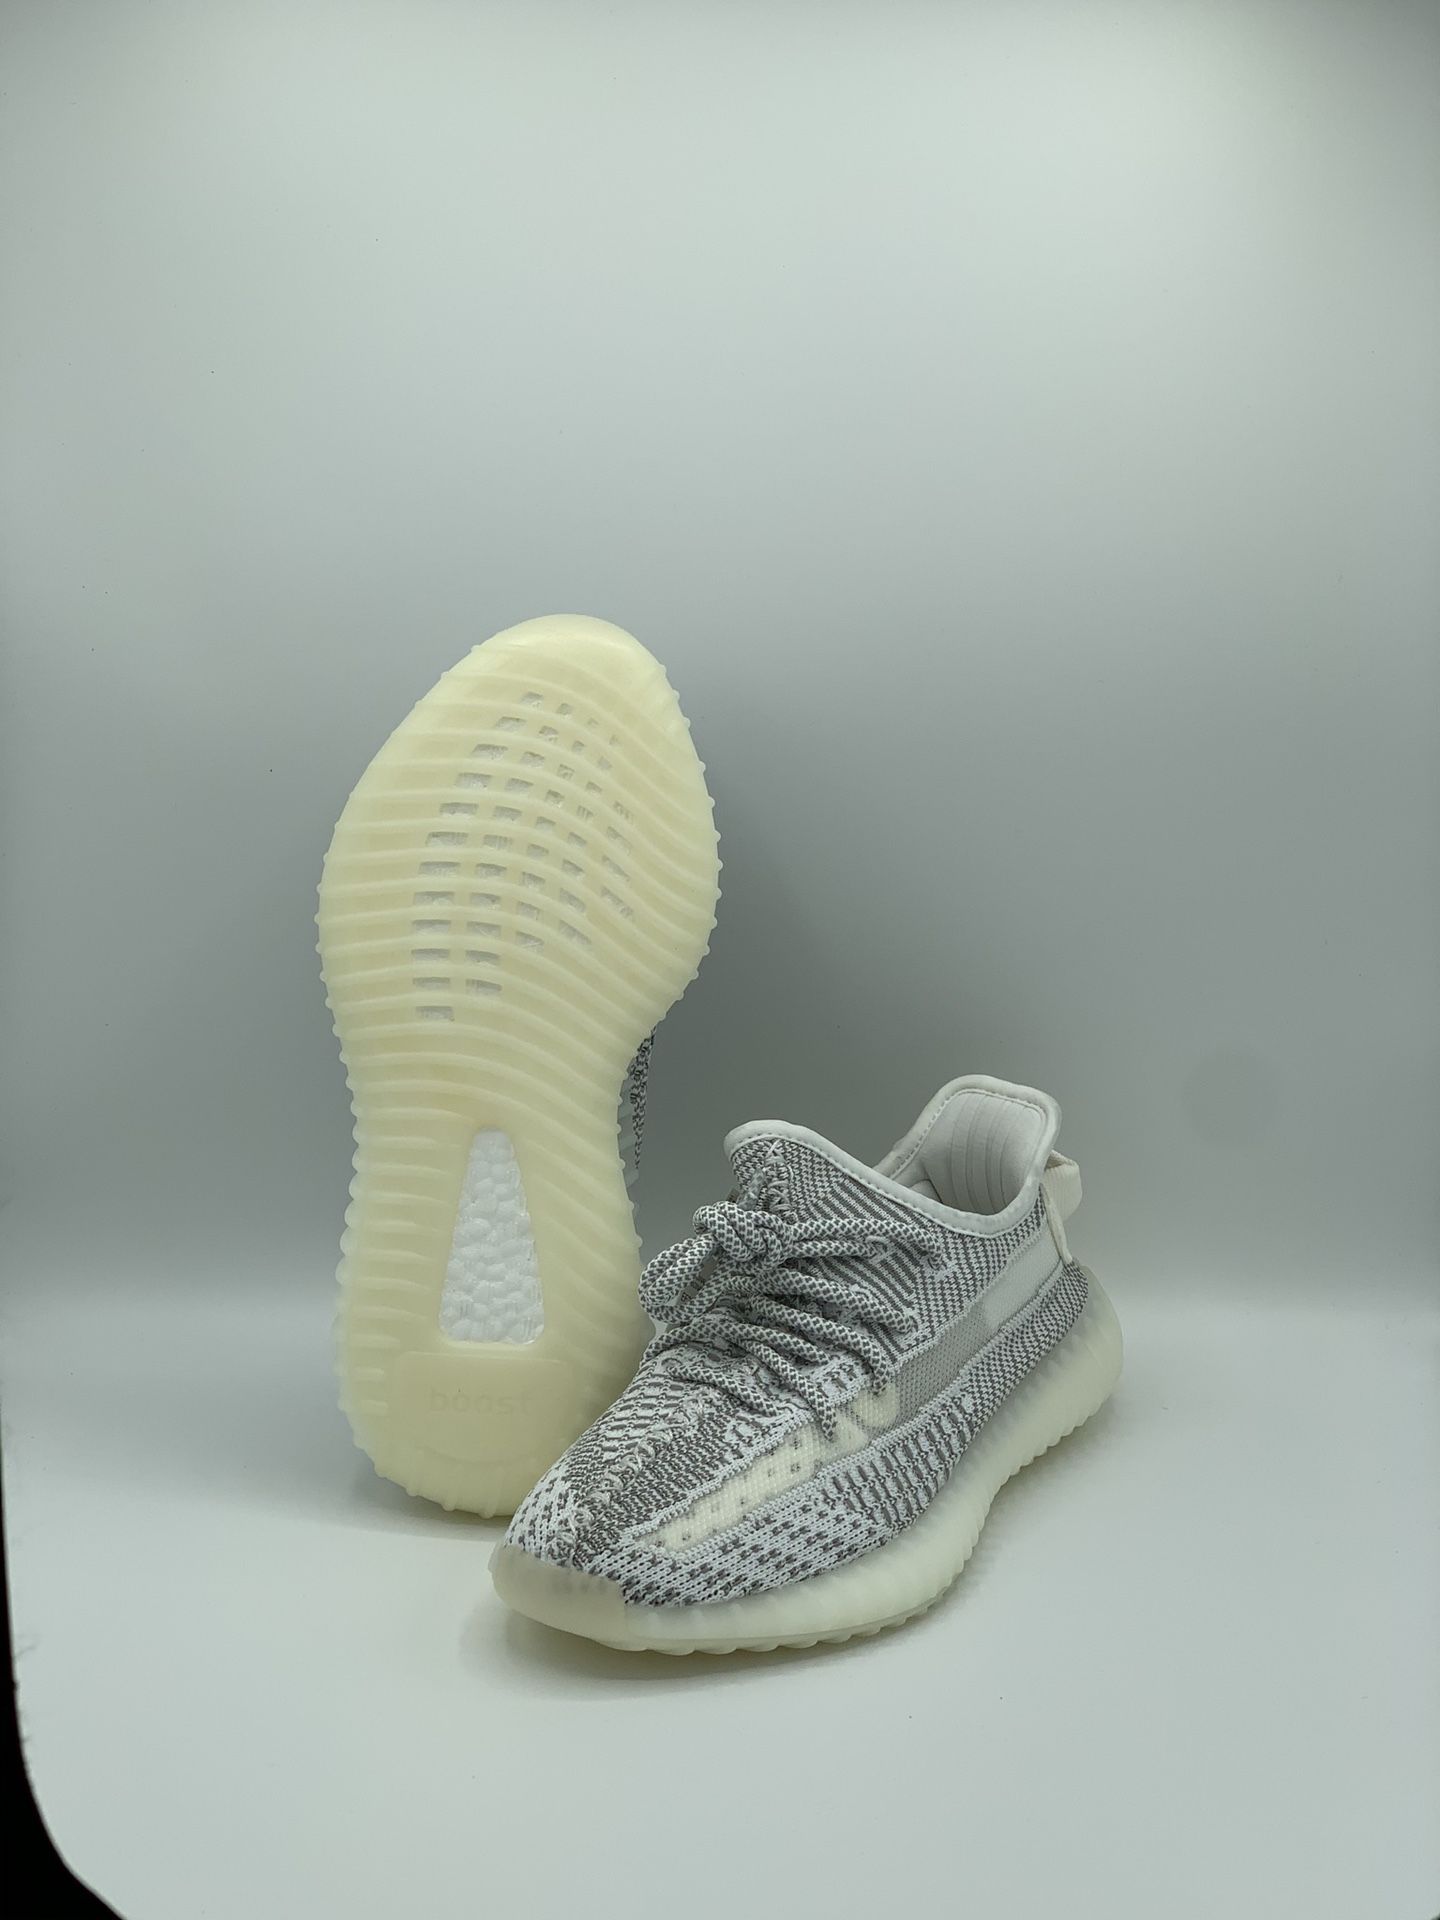 Adidas Yeezy 350 v2 Static (Non-Reflective) DS Size 5